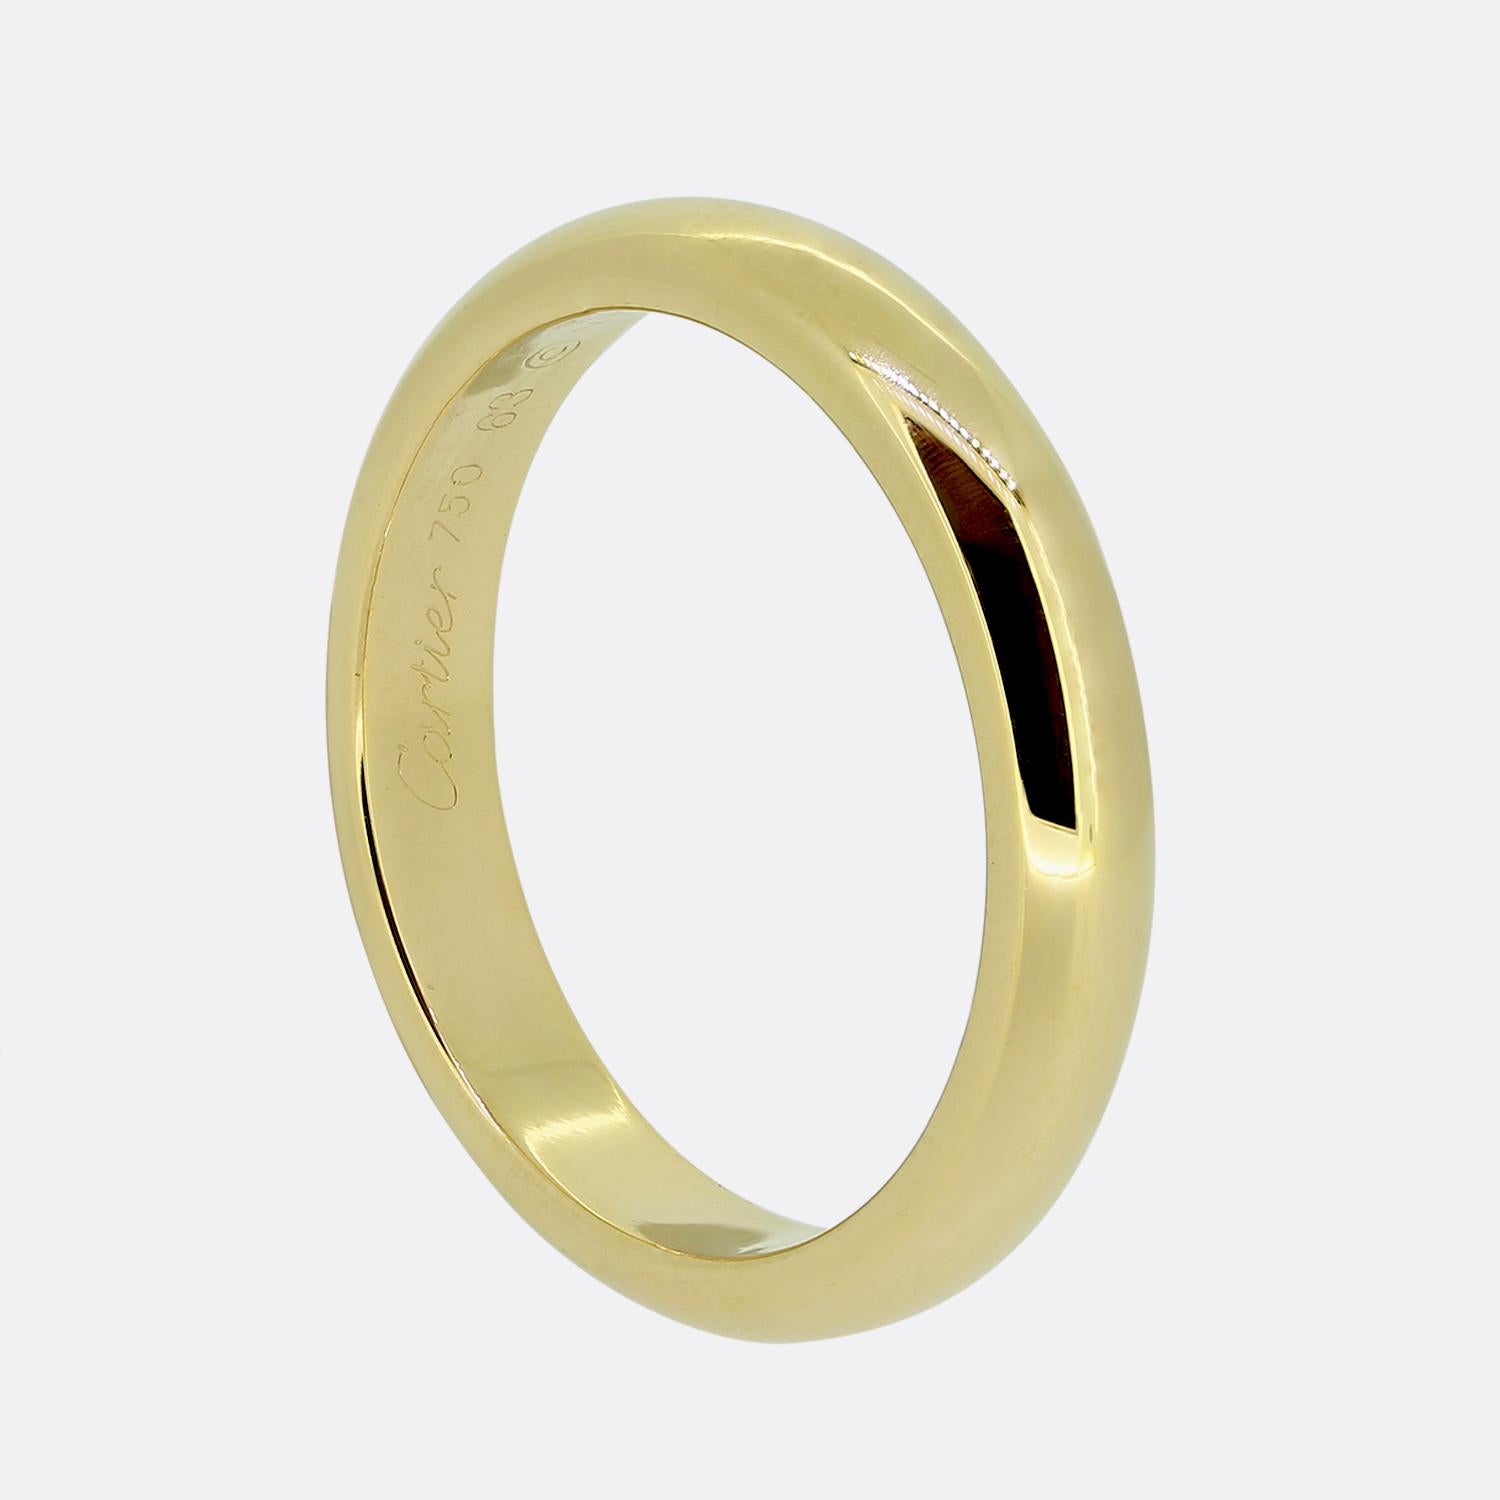 This is a plain 18ct yellow gold D-shaped wedding band from the world renowned jewellery house of Cartier. The band is 4mm in width and is totally unembellished providing a sleek, classic look. It forms part of the 1895 collection.

Condition: Used